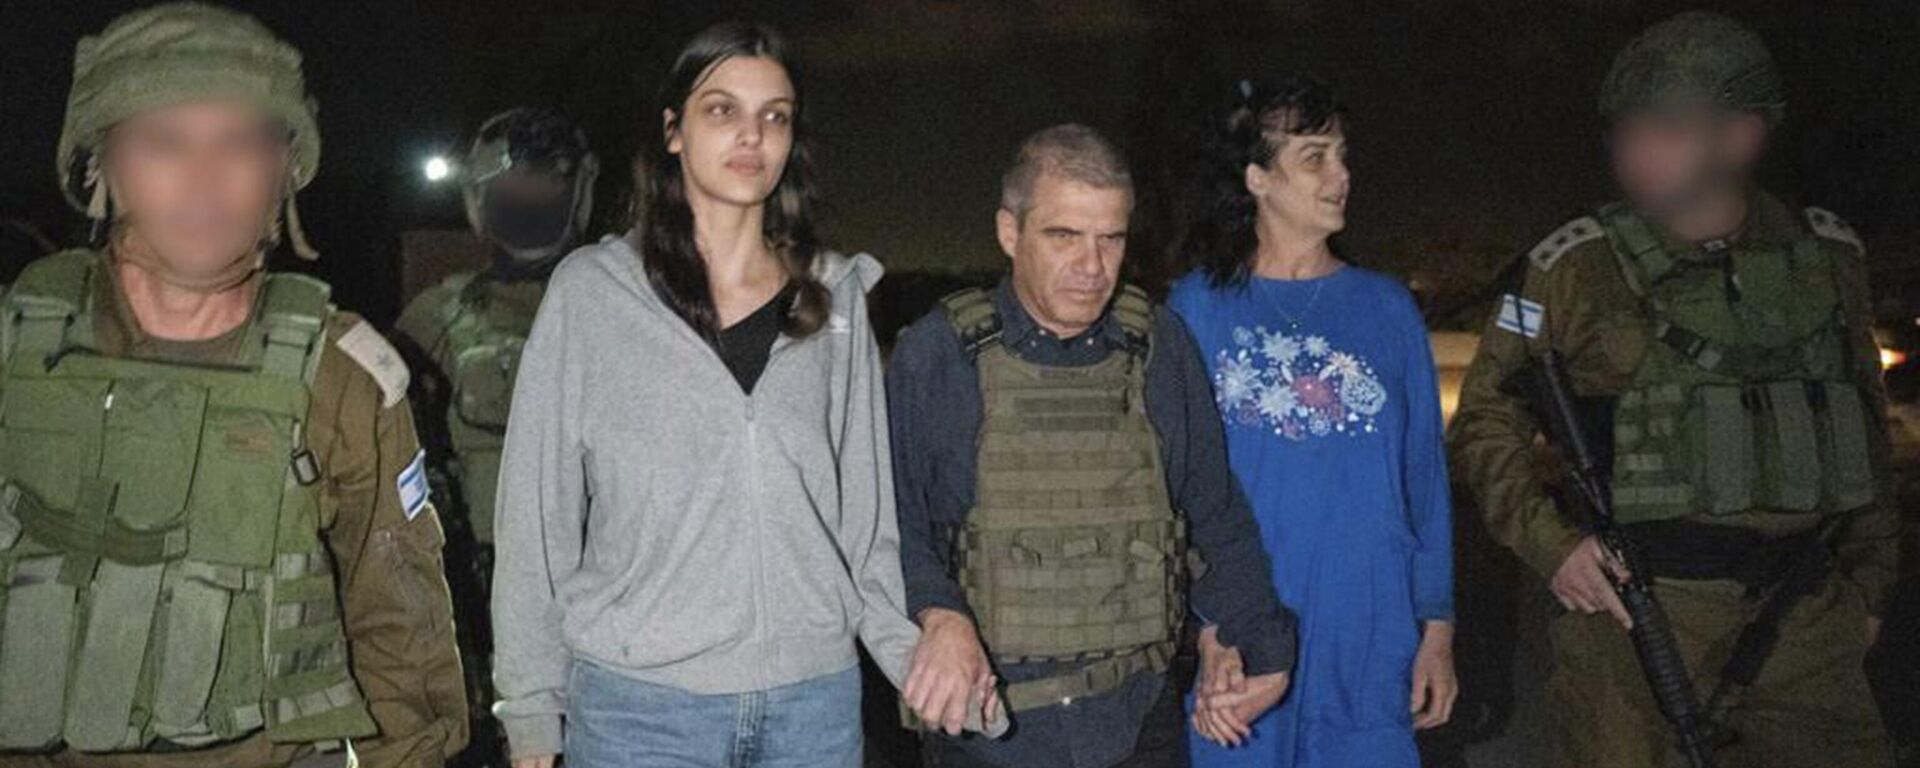 In this photo provided by the Government of Israel, Judith Raanan, right, and her 17-year-old daughter Natalie are escorted by Israeli soldiers and Gal Hirsch, Prime Minister Benjamin Netanyahu's special coordinator for returning the hostages, as they return to Israel from captivity in the Gaza Strip, Friday, Oct. 20, 2023. Hamas released the pair in what it said was a goodwill gesture late Friday, nearly two weeks after they were captured in a bloody cross-border raid by the Islamic militant group. The Hamas attack sparked a war that is entering its third week, and Hamas is believed to still be holding some 200 people hostage. - Sputnik International, 1920, 21.10.2023